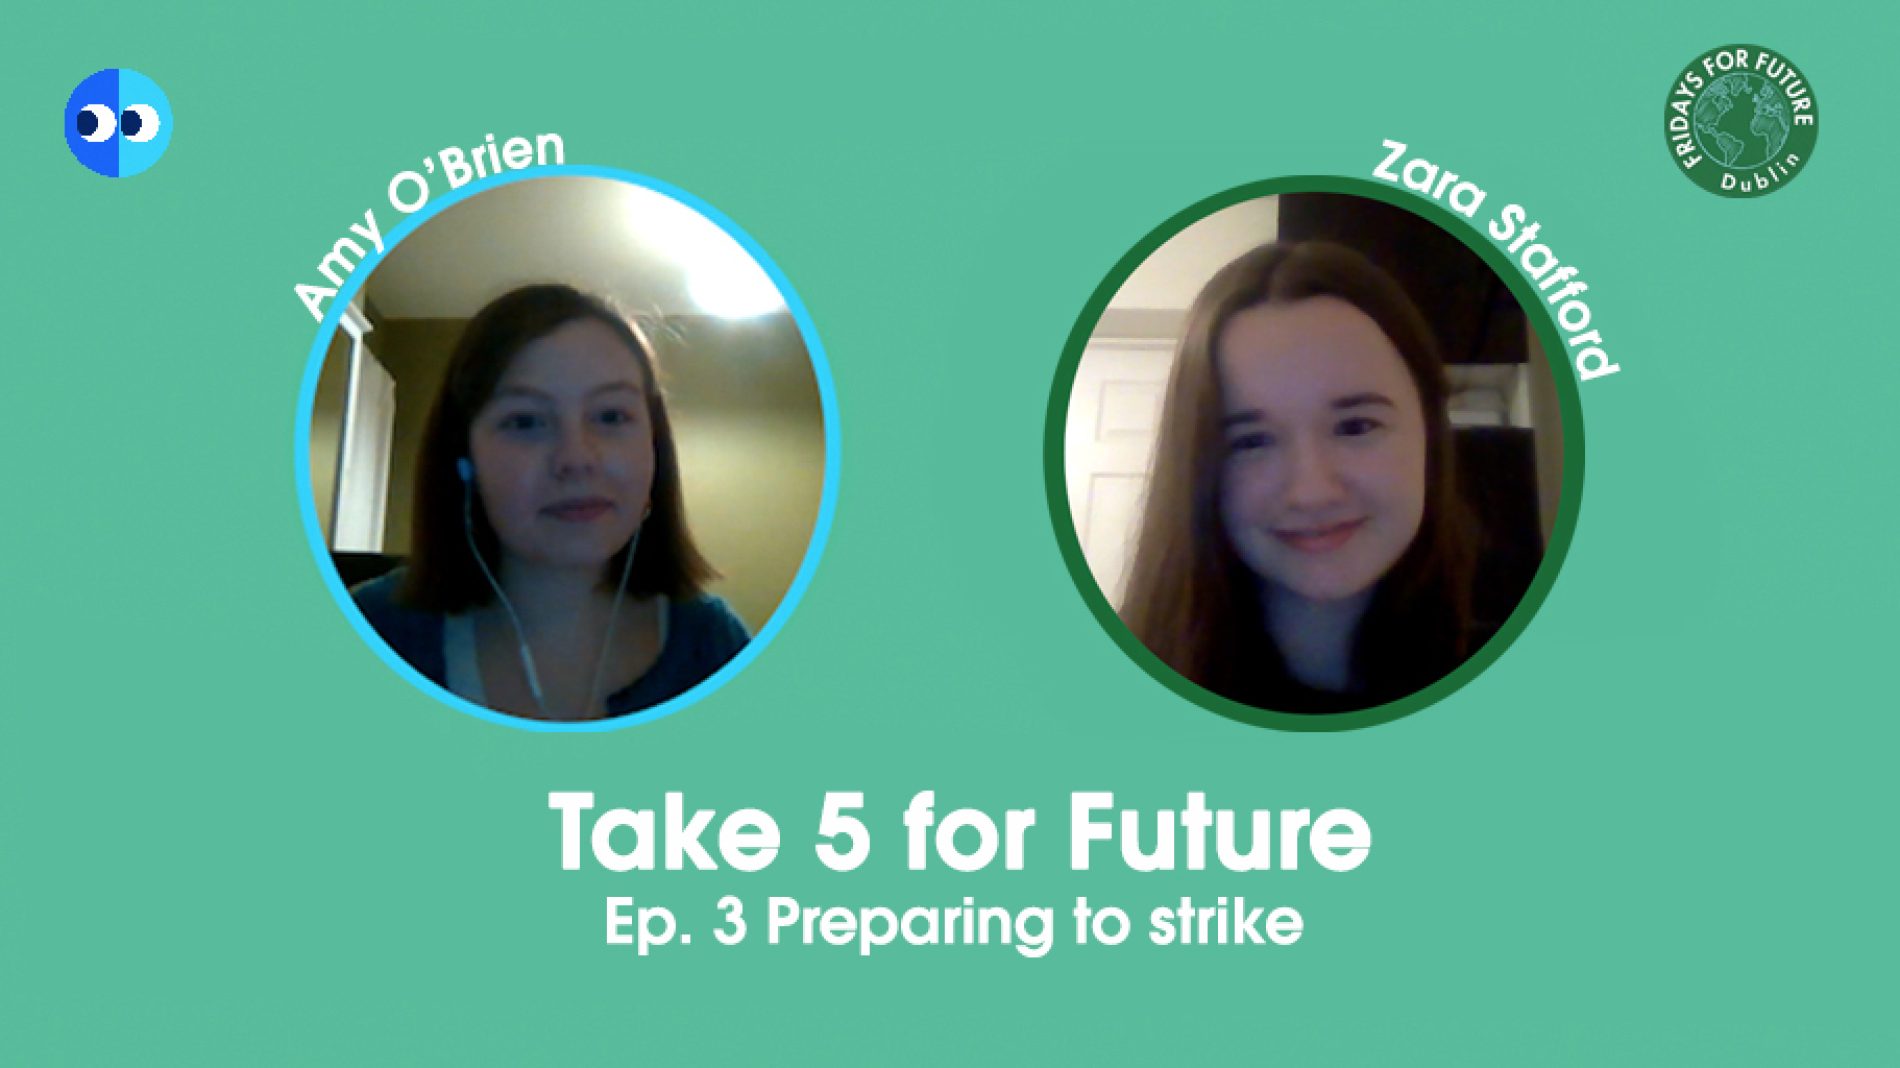 photos of two young people against a green background text reads 'take 5 for Future episode 2 preparing to striken